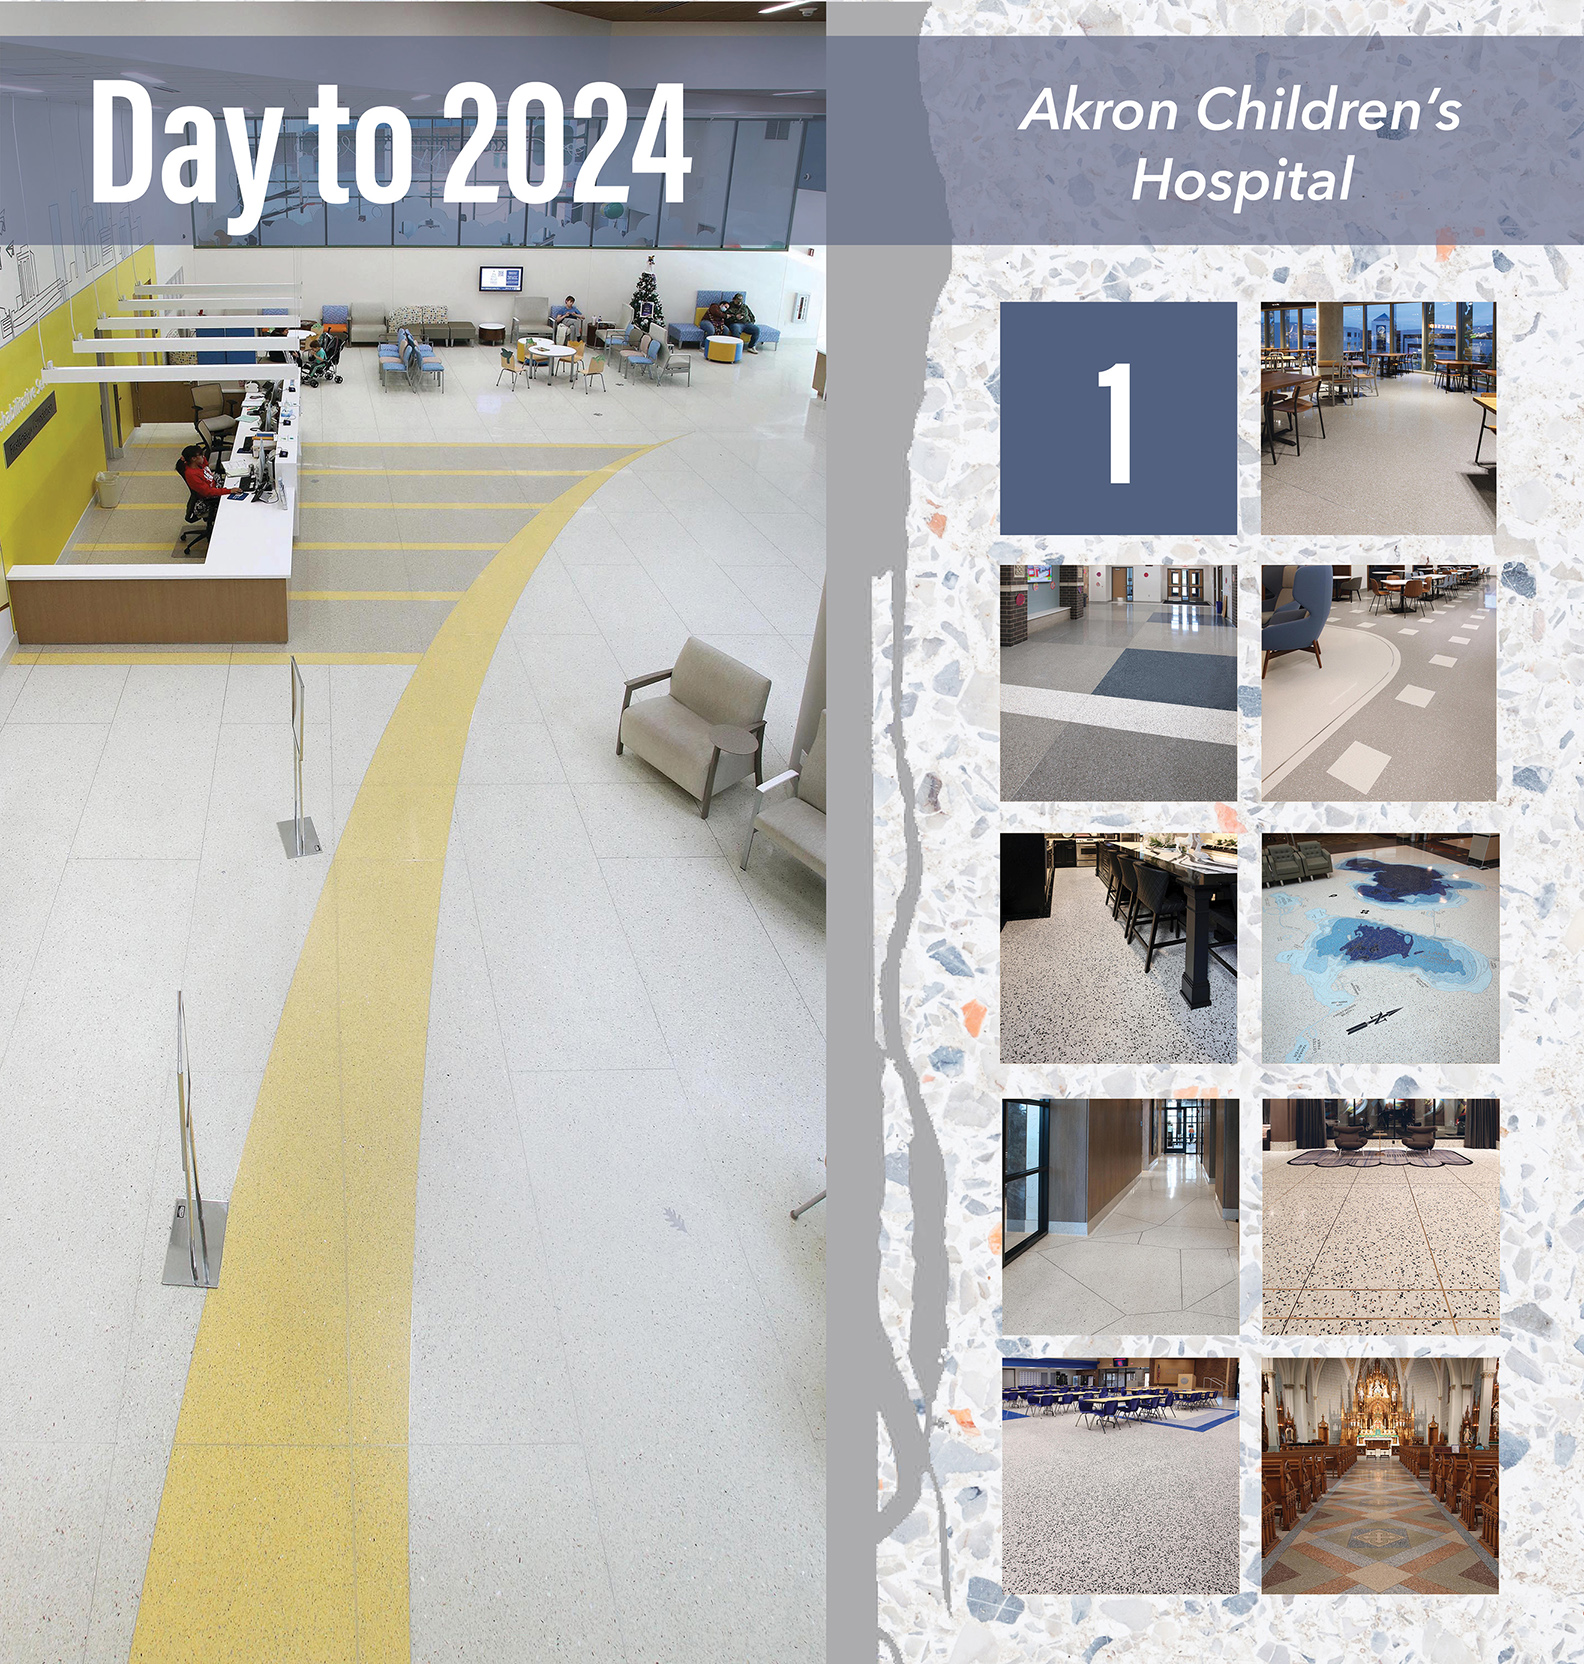 Countdown to 2024: Top 10 Terrazzo Projects